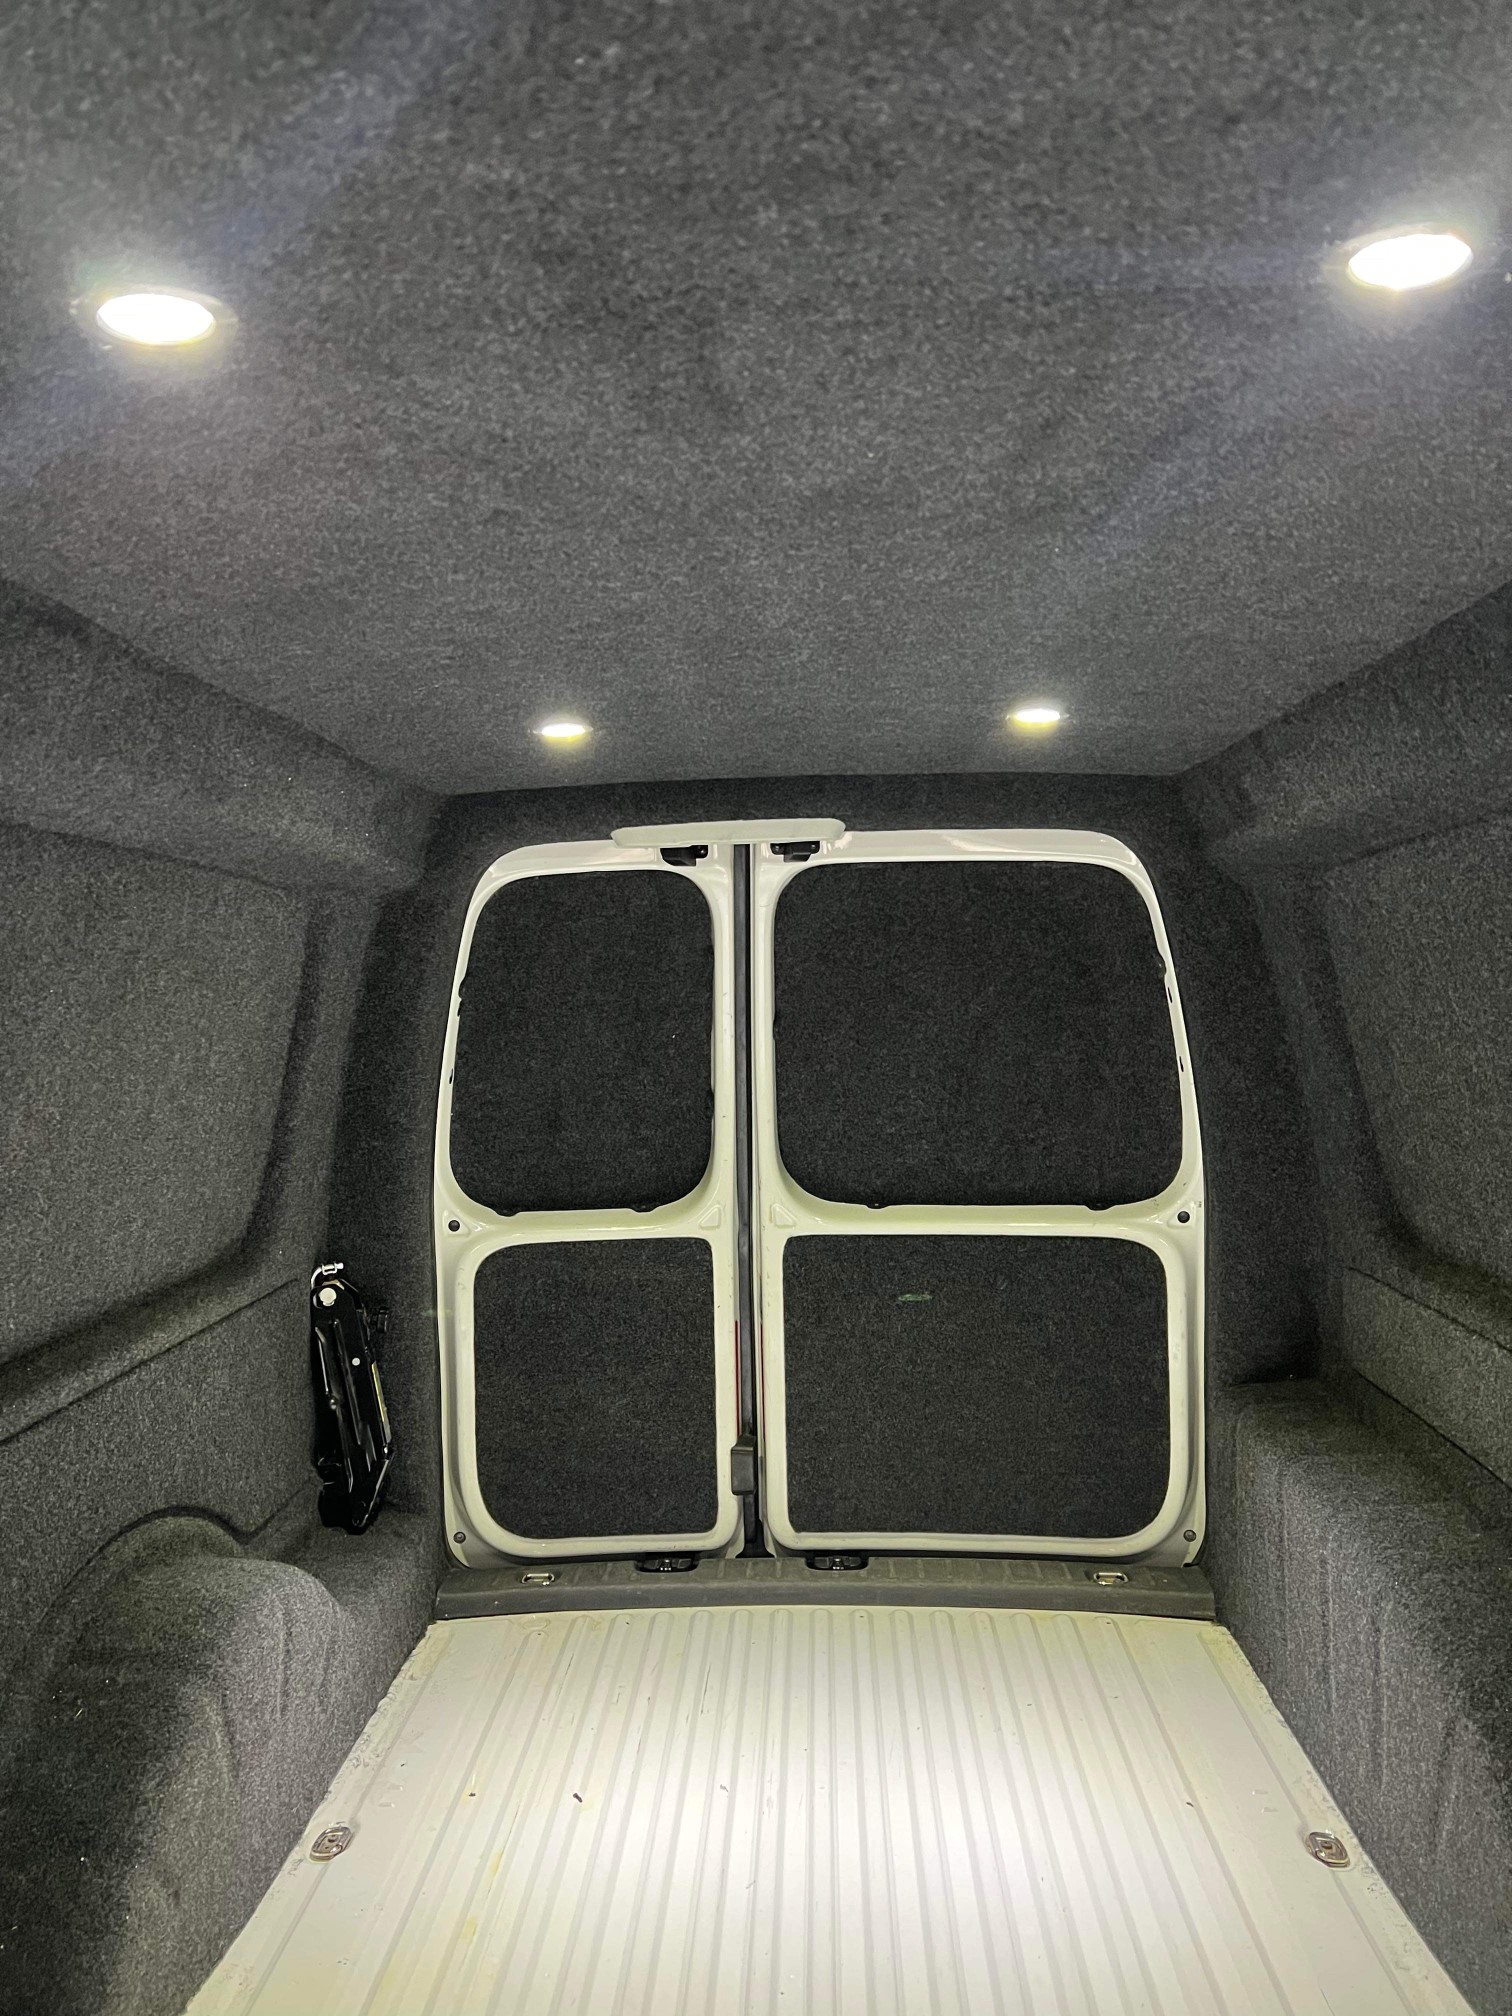 VW Caddy, Windows, insulation, carpet, lights, floor and Altro flooring, fit (